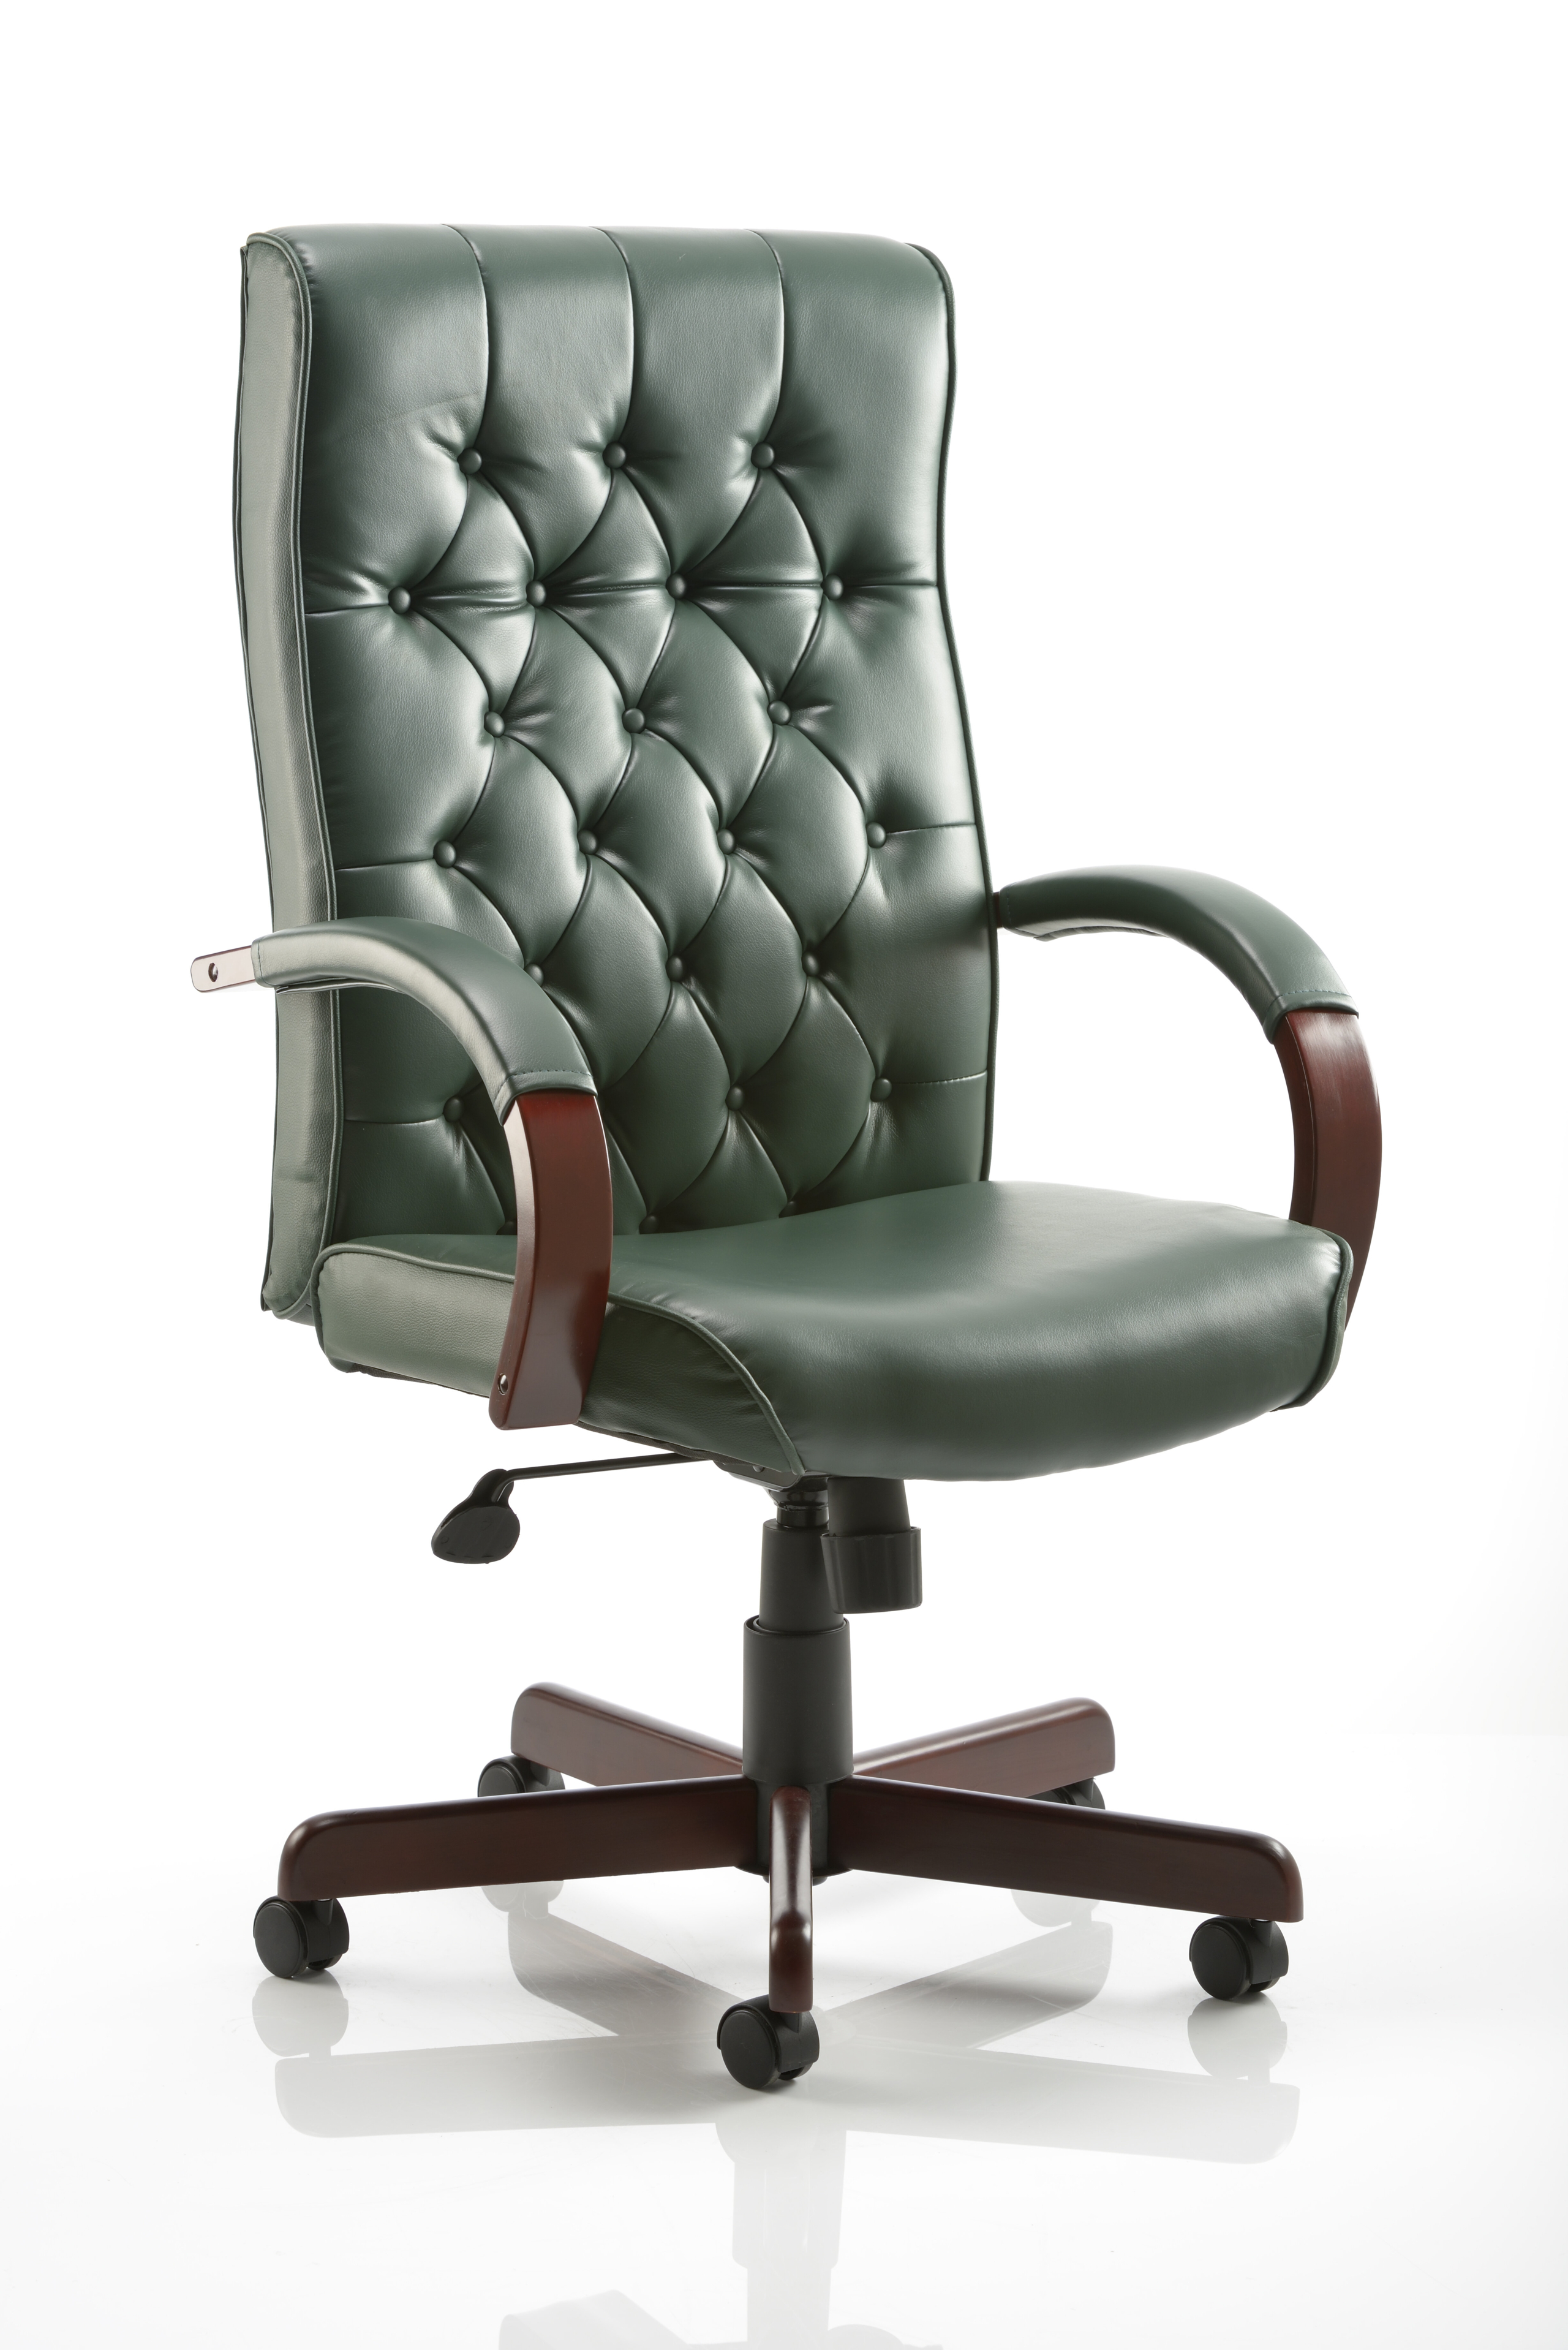 Chesterfield leather office chair green